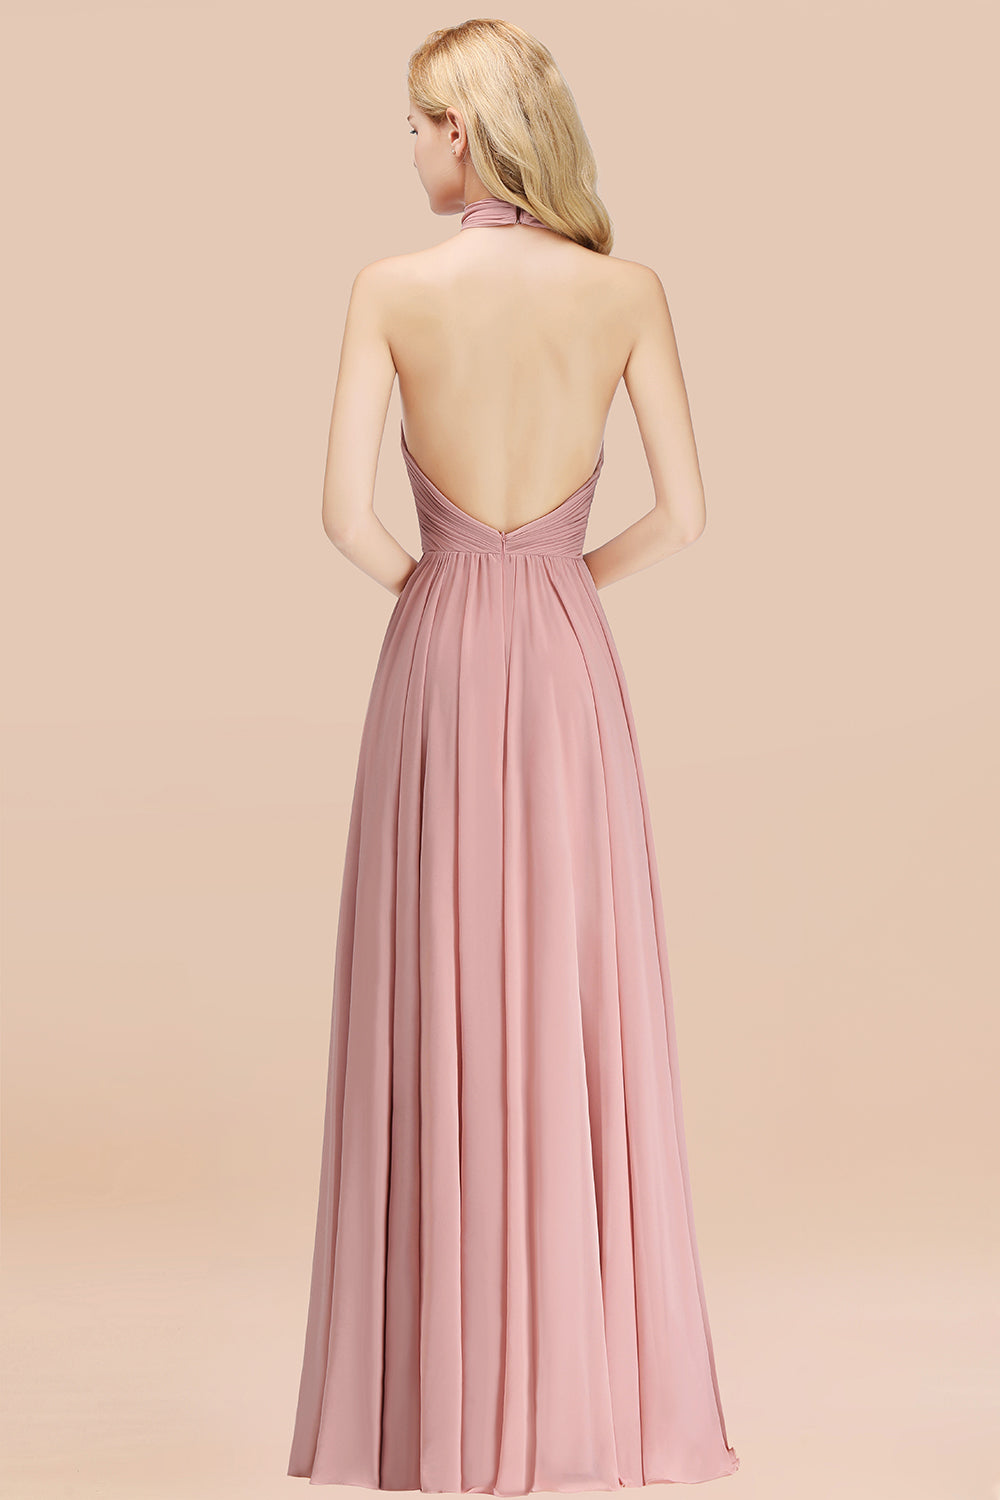 Gorgeous High-Neck Halter Backless Bridesmaid Dress Dusty Rose Chiffon Maid of Honor Dress